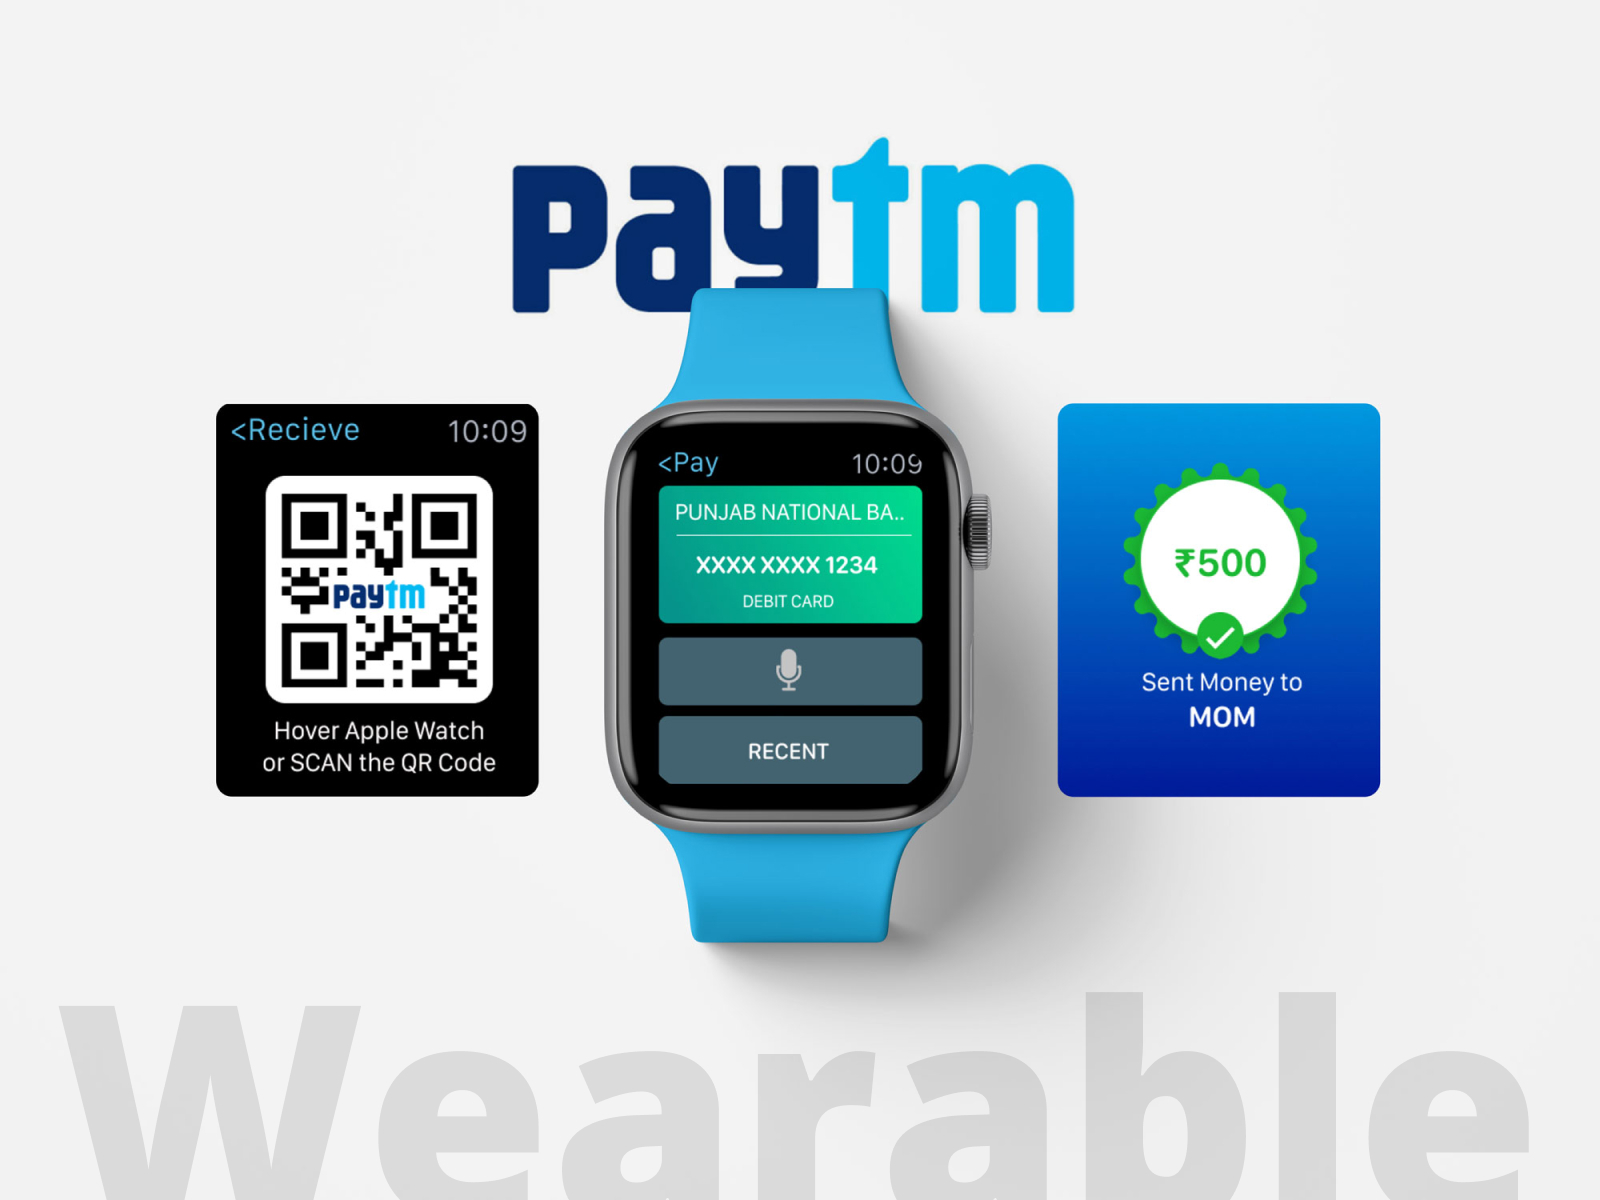 Paytm Mall Rs.1 Sale - Loot Products @ Just Rs.1 in Paytm Flash Sale - Paytm  Mall Rs.1 Deals